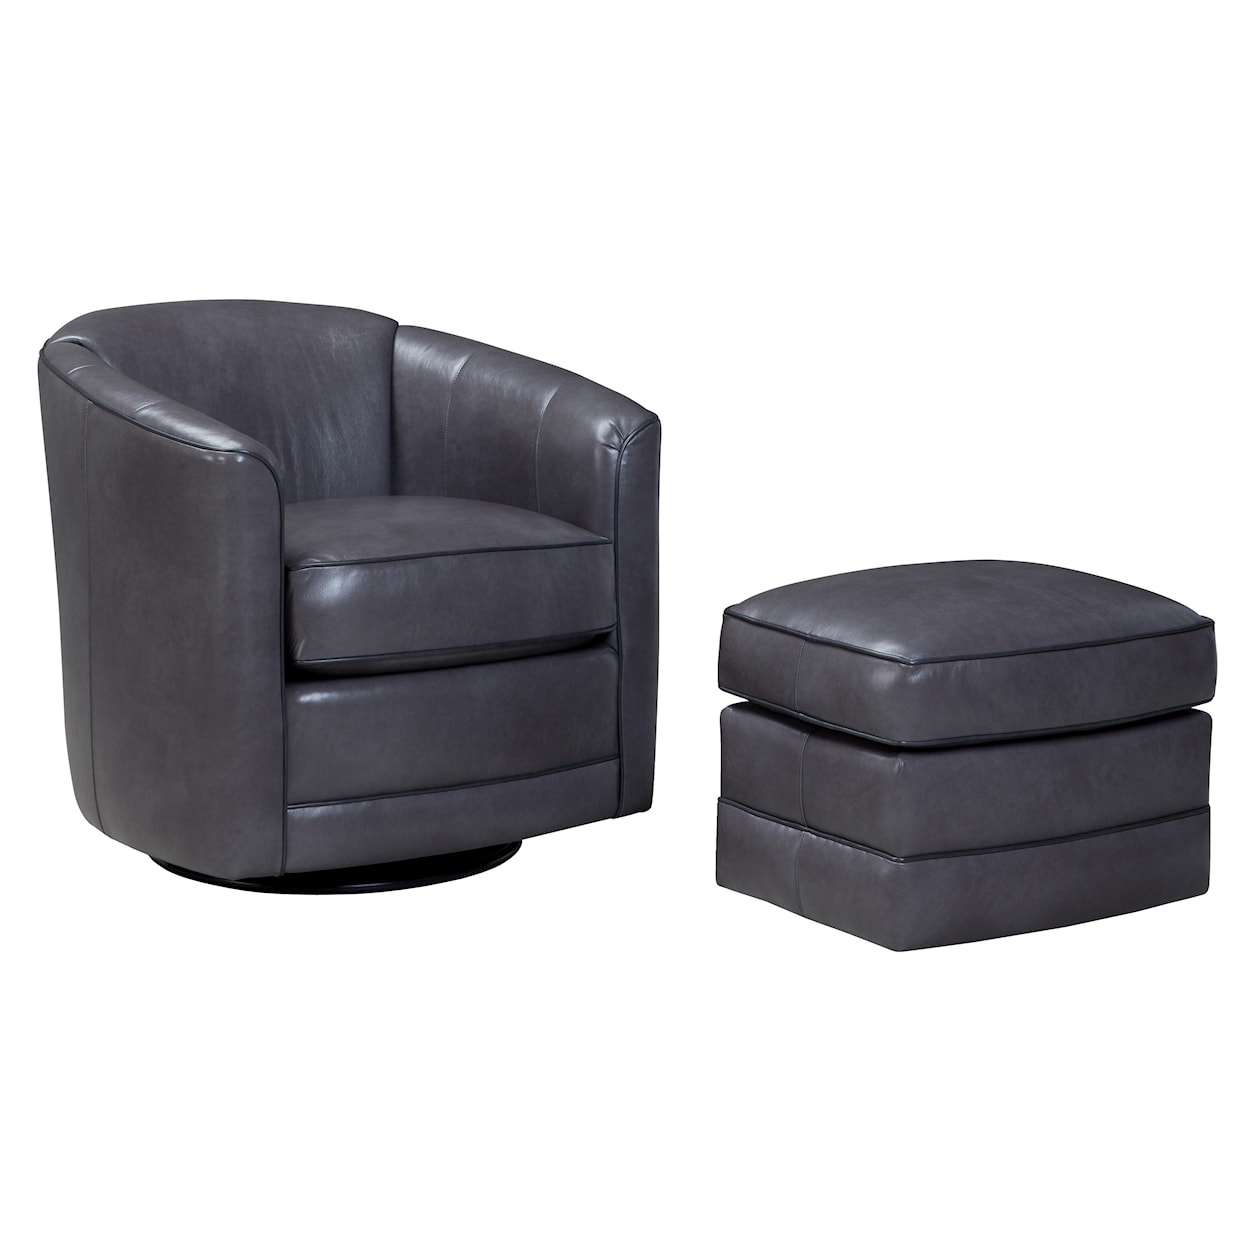 Smith Brothers 506 Ottoman for Swivel Chair